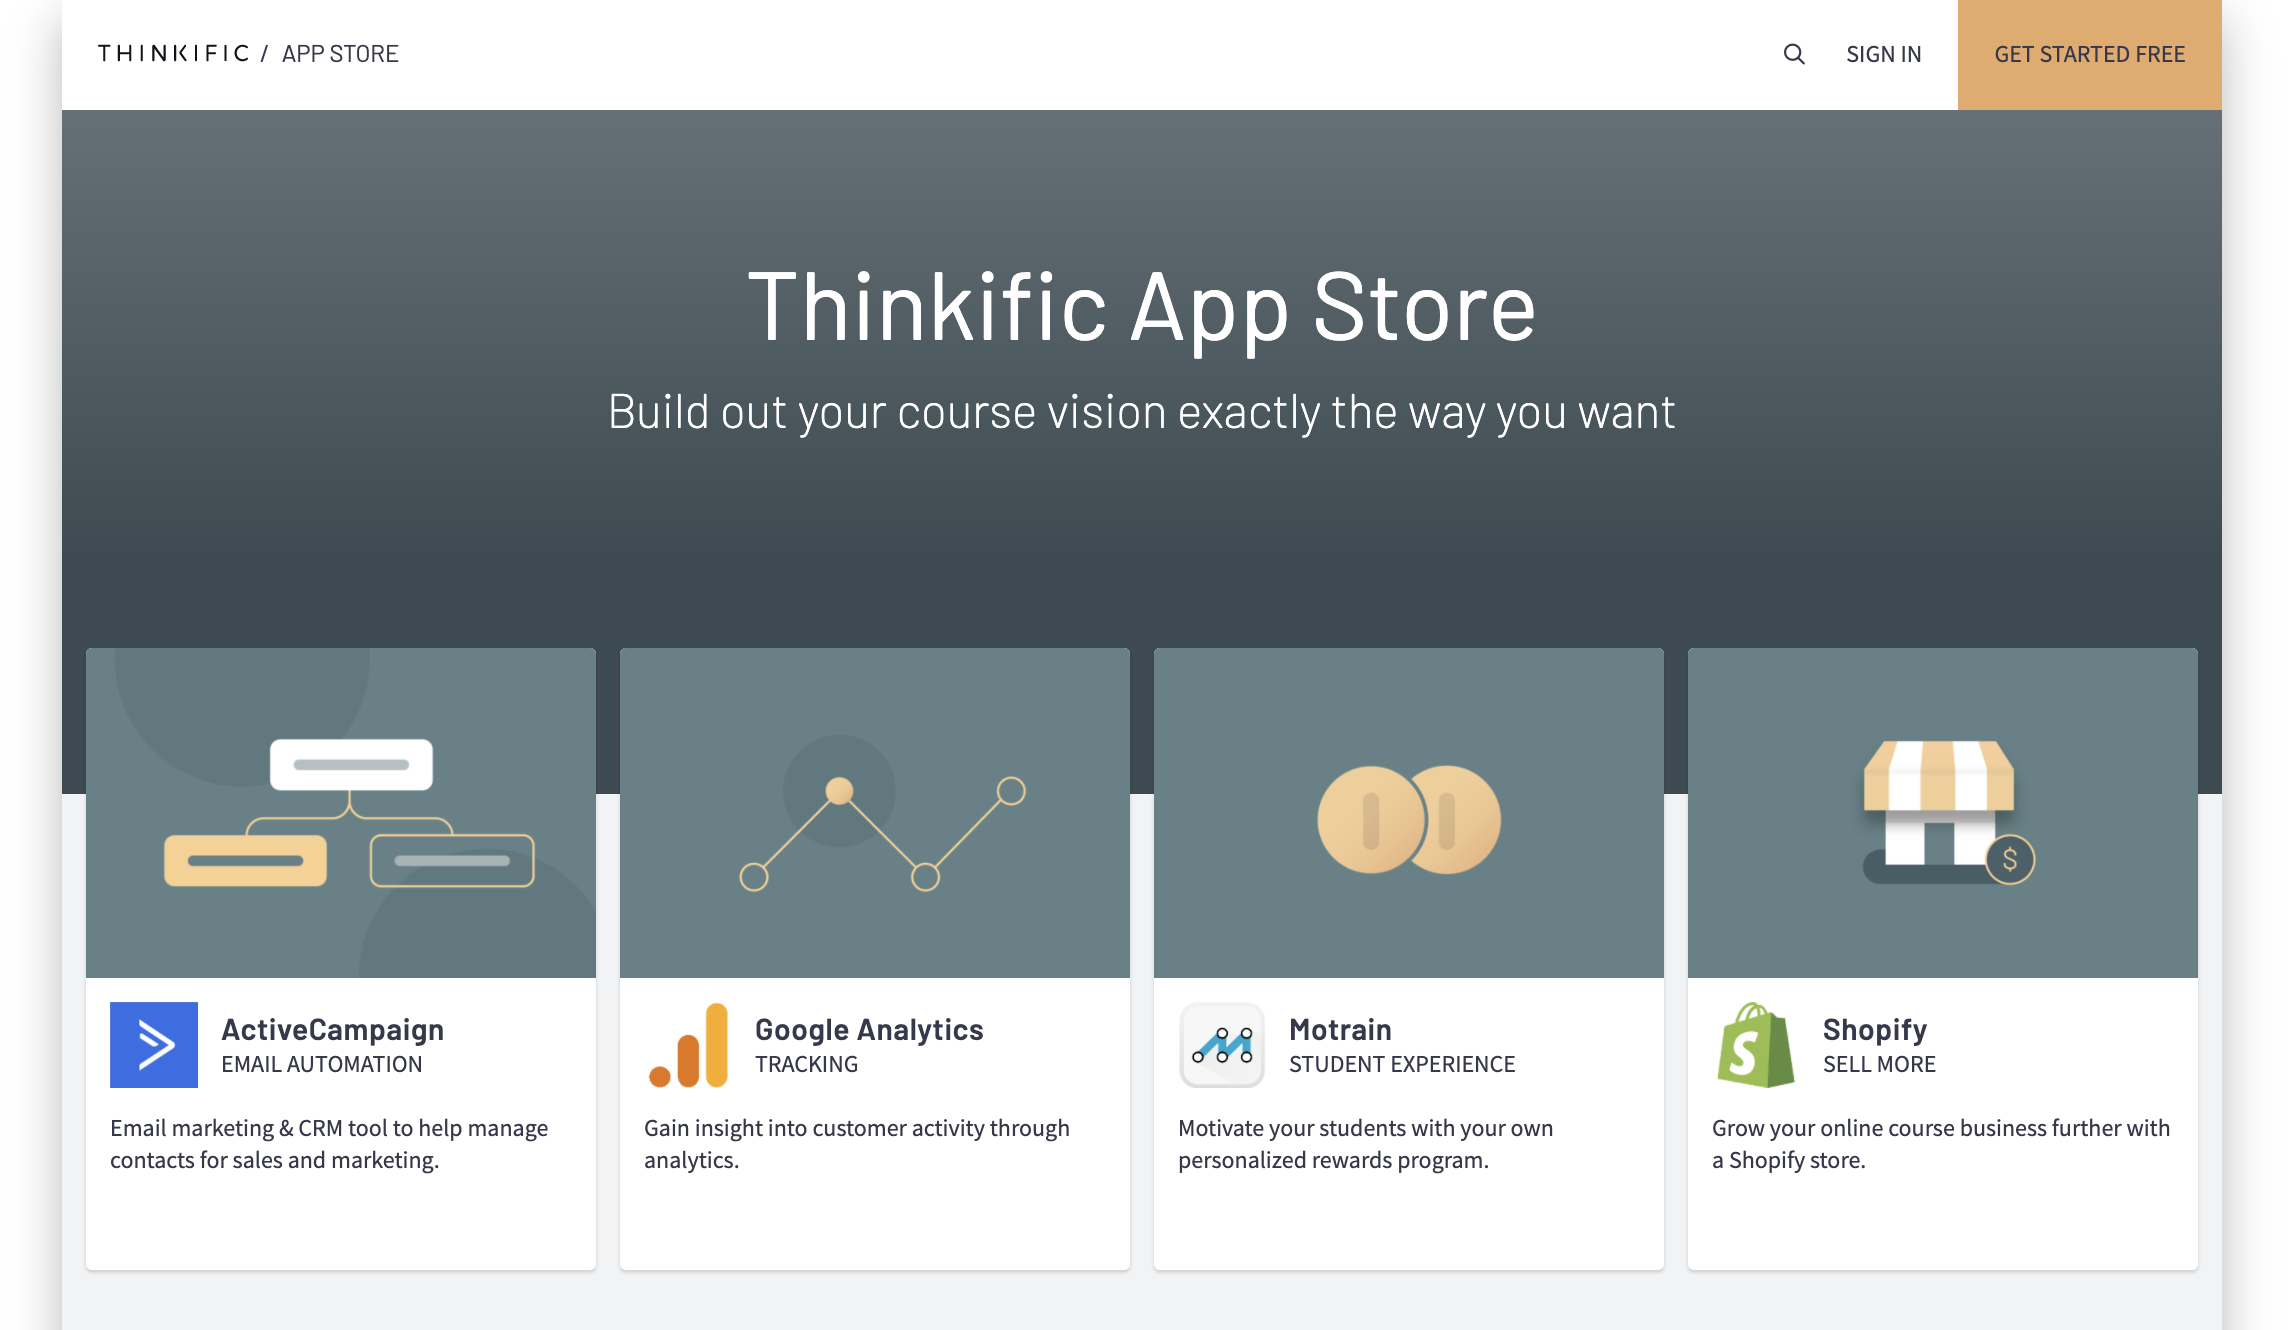 Thinkific Software - It’s never been easier to make your online course vision a reality. Our app store empowers anyone to create meaningful learning experiences, build community or grow a business, no matter their expertise.